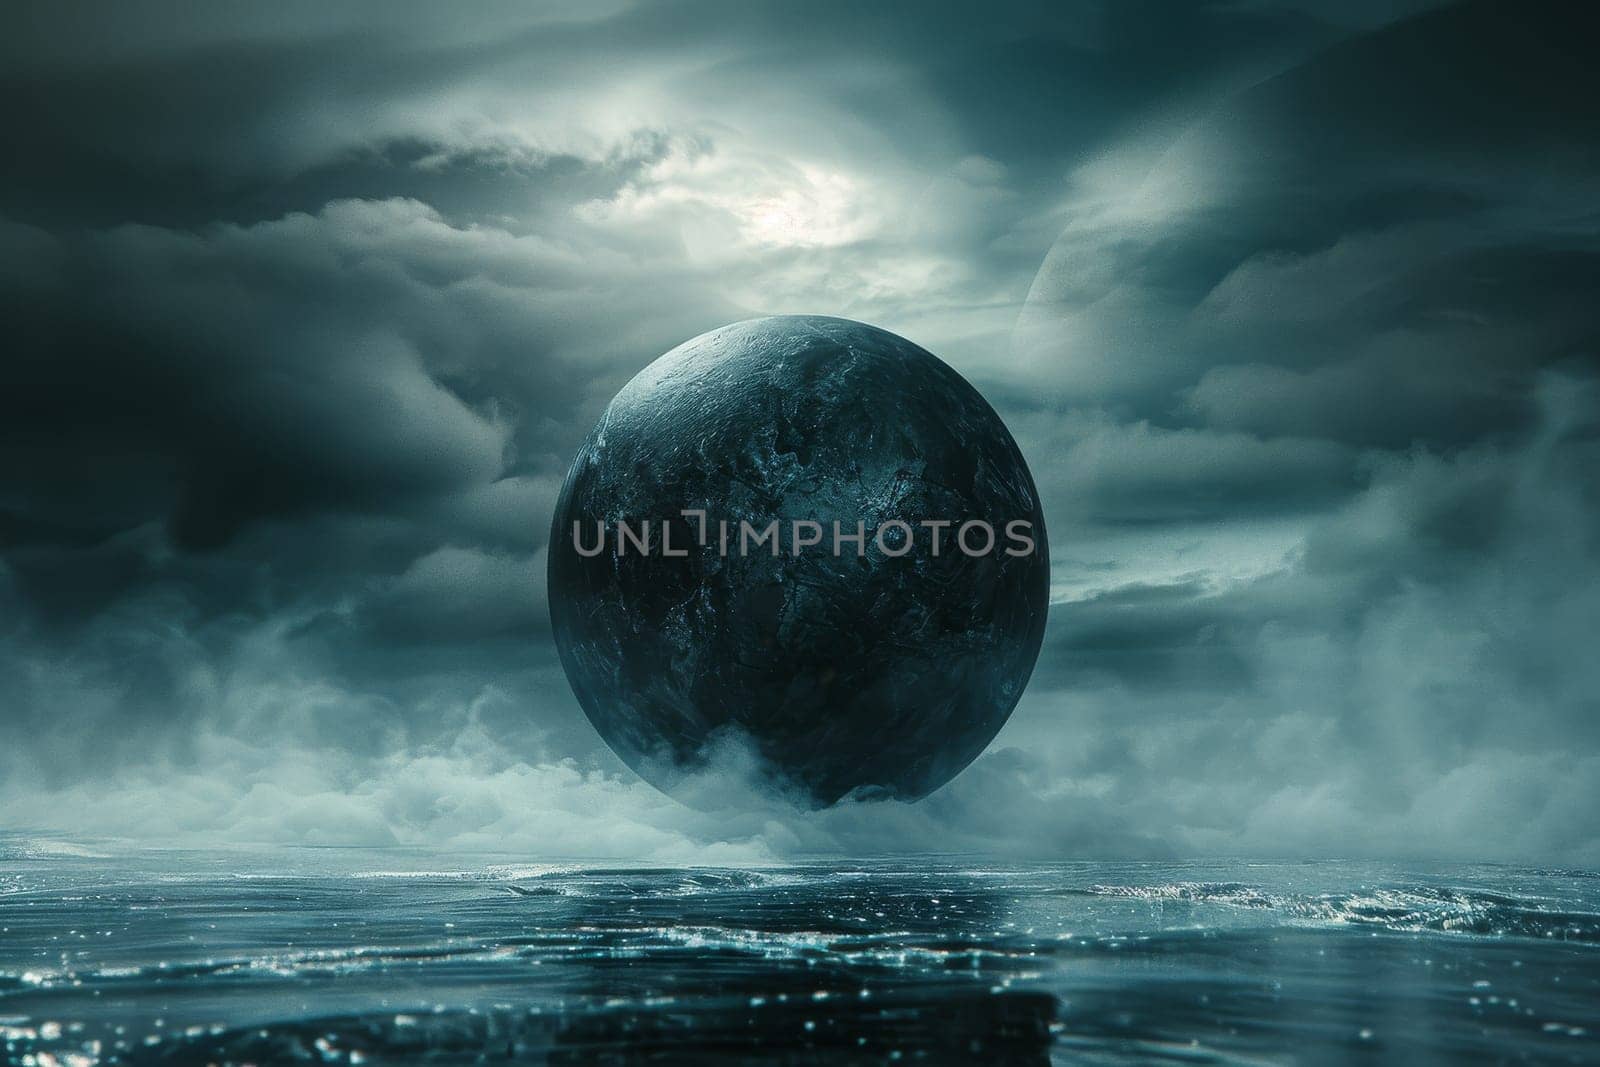 A large, dark, and mysterious planet is floating in the sky above a body of water. The sky is filled with clouds, giving the scene a moody and ominous atmosphere